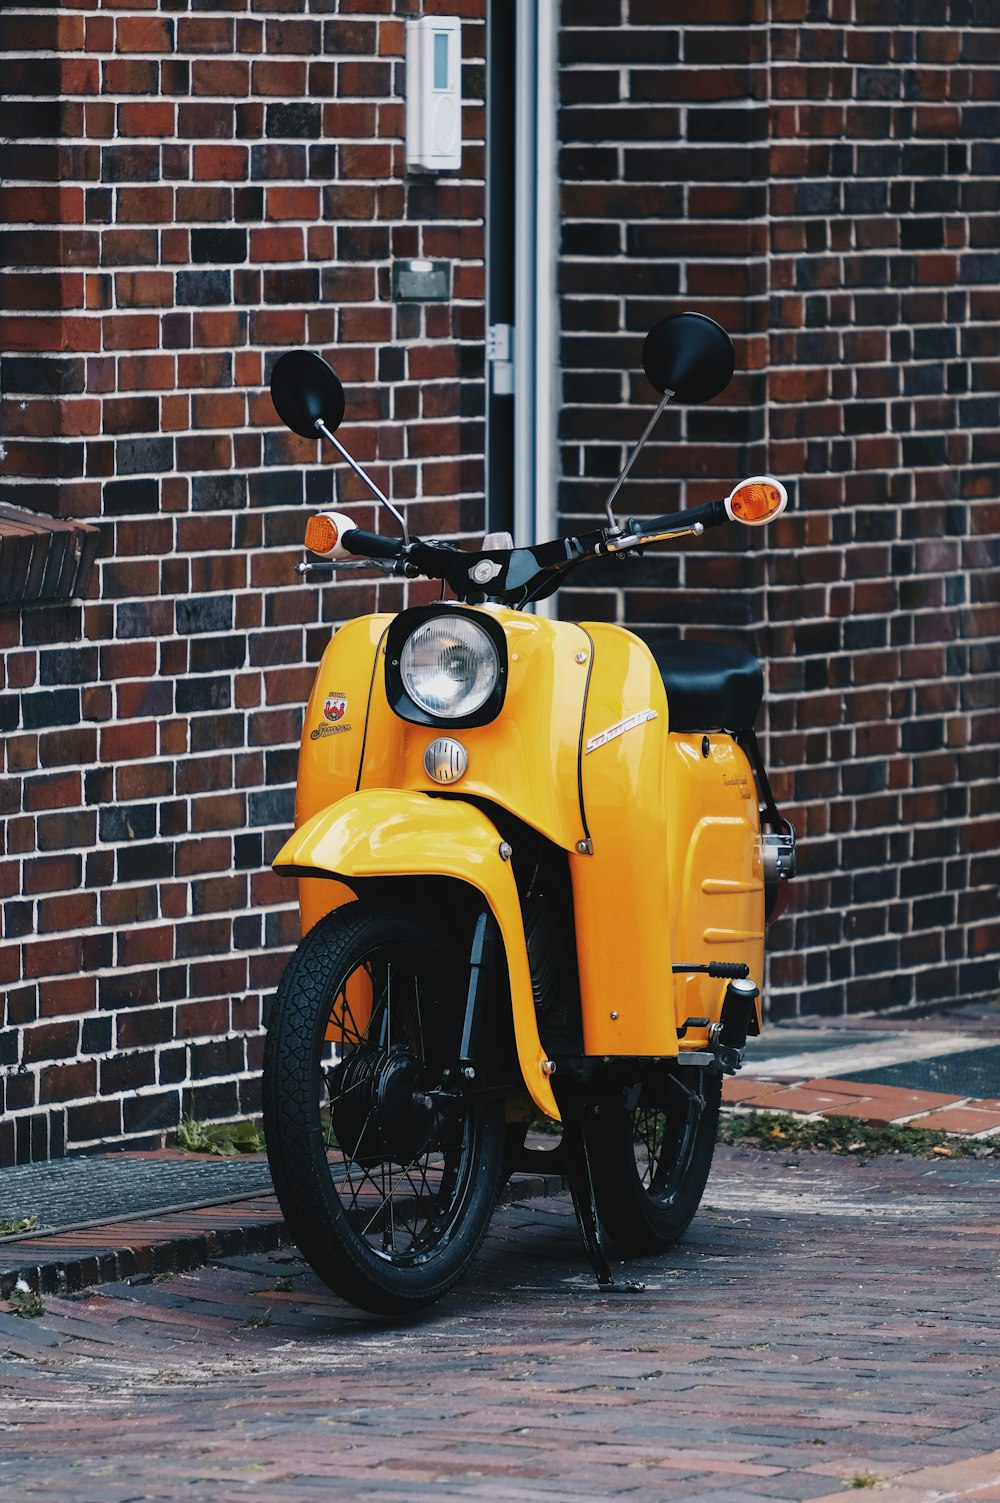 yellow and black motorcycle parked beside brown brick wall photo – Free  Papenburg Image on Unsplash